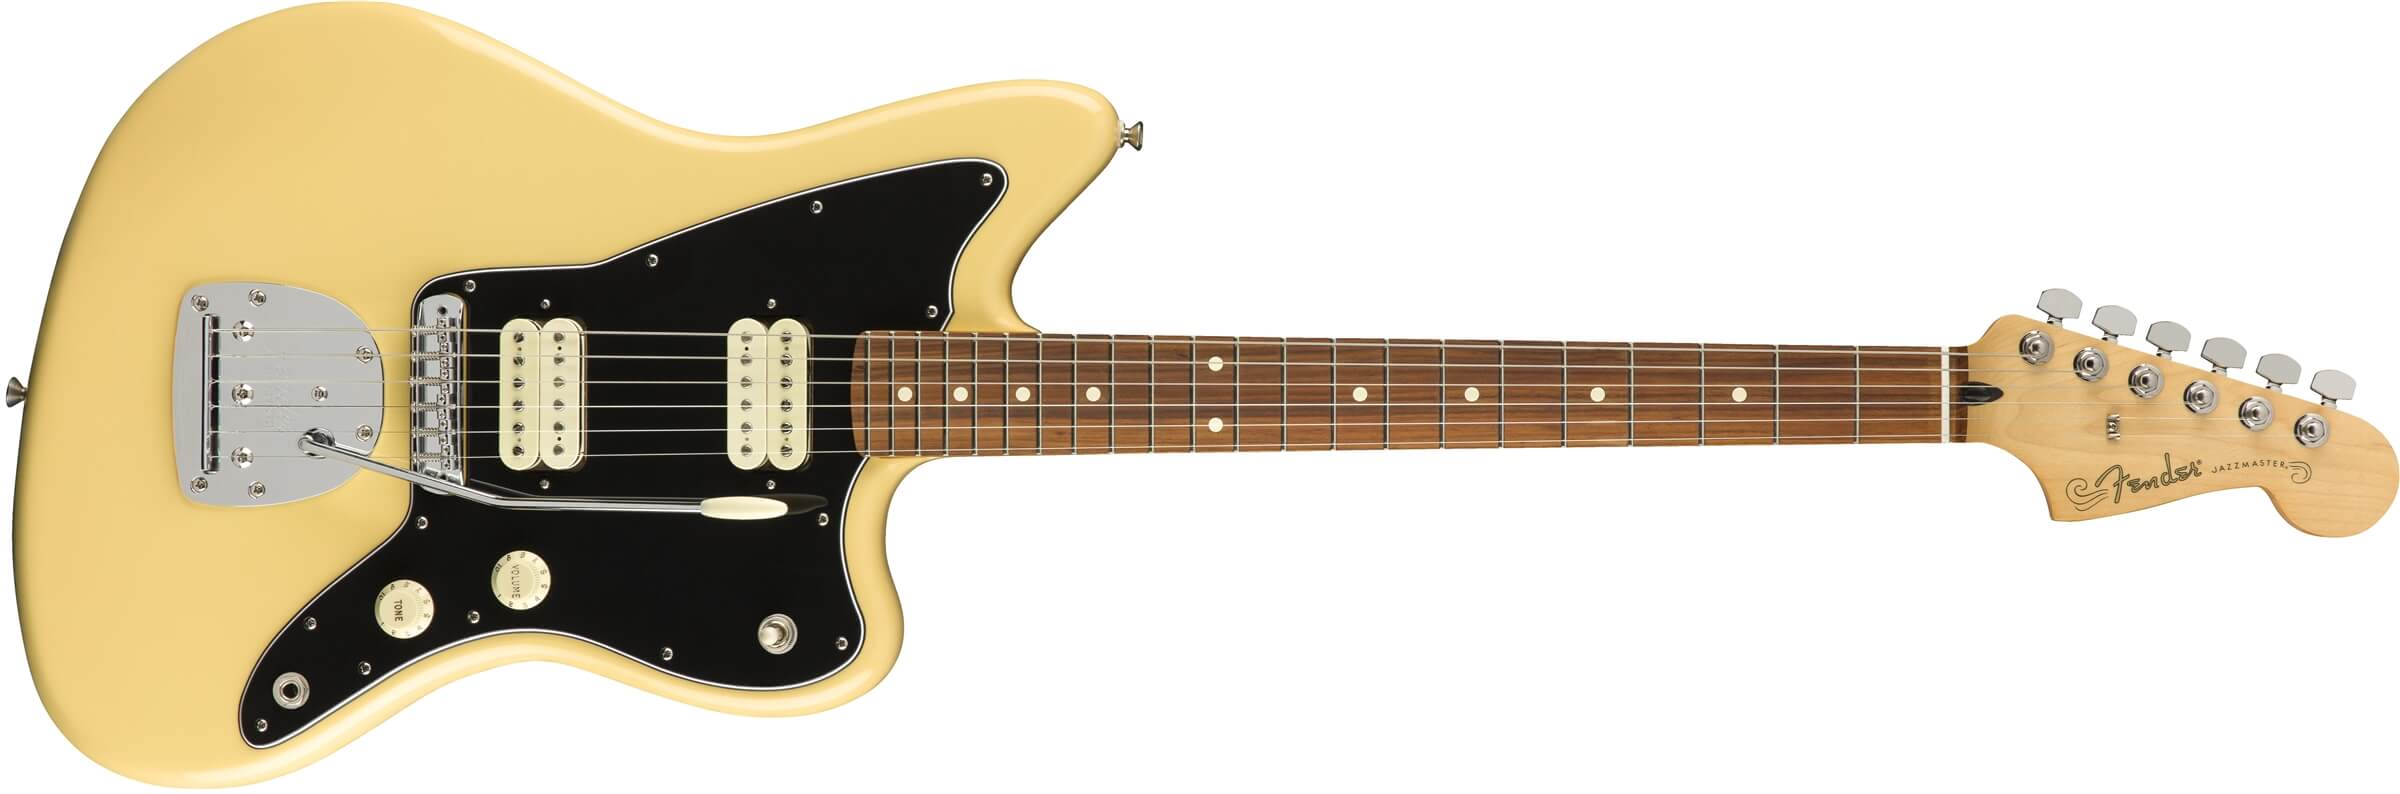 Fender Player Series Jazzmaster Review